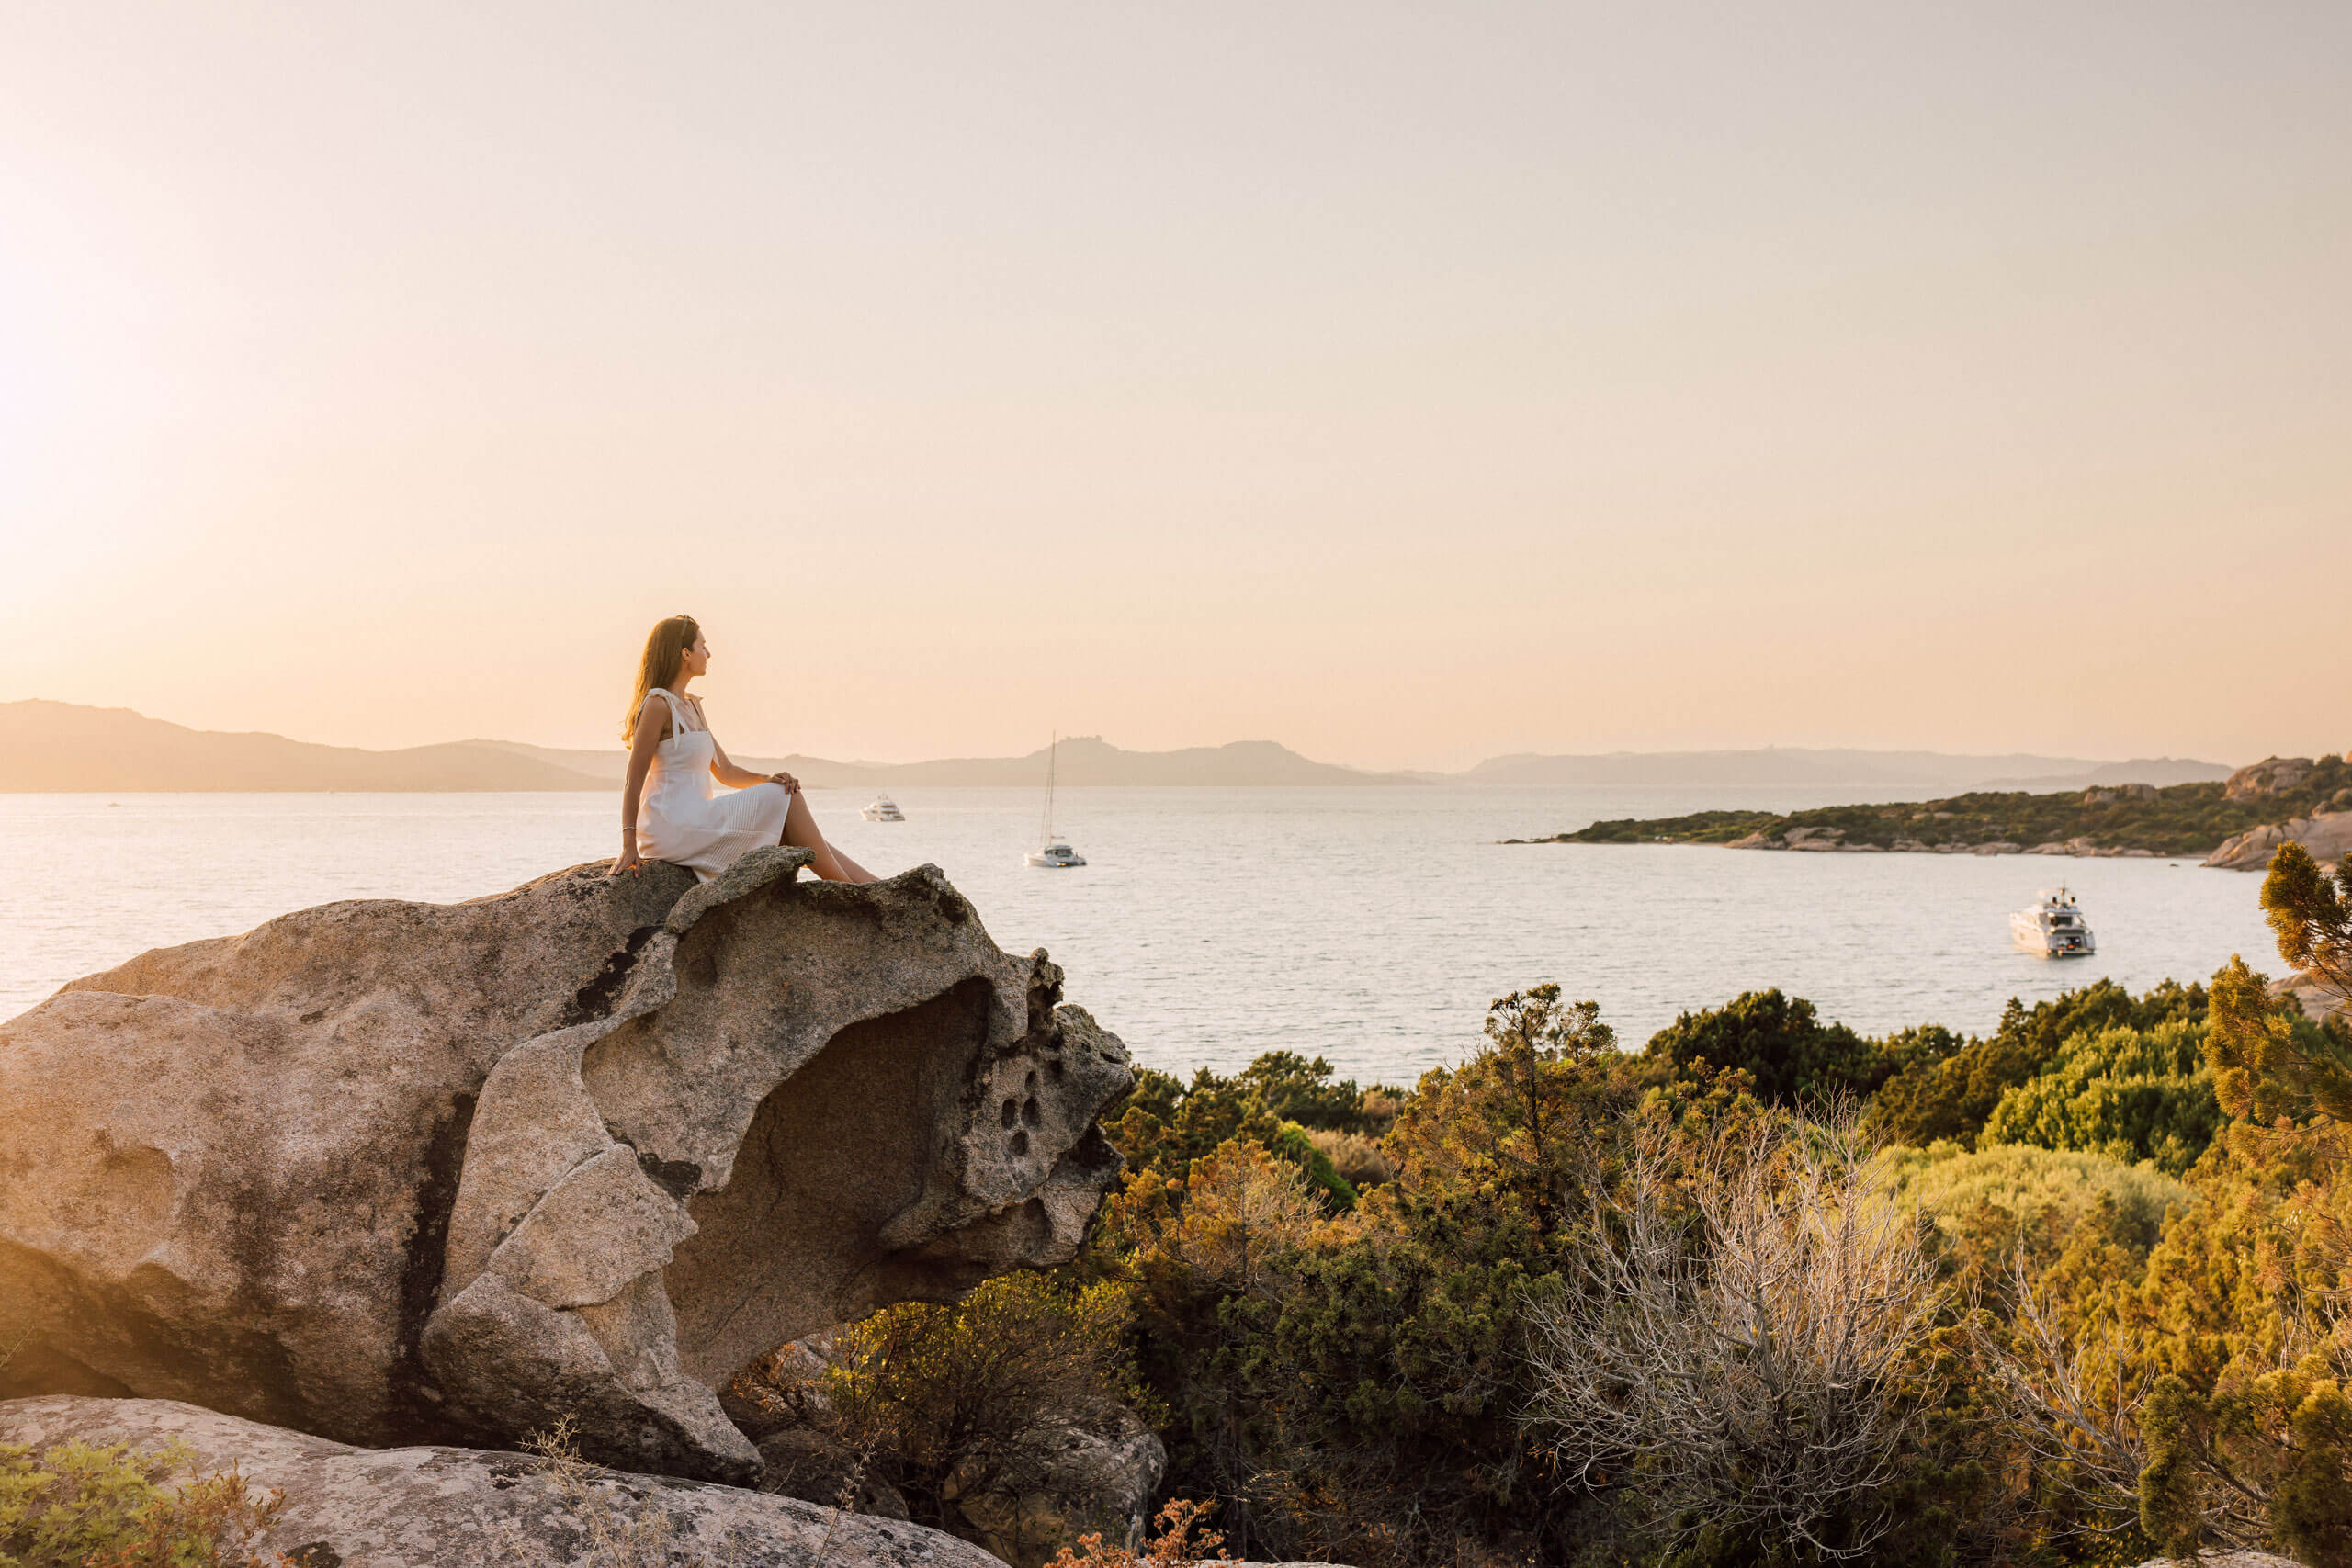 A woman sitting on a rock overlooking a body of water